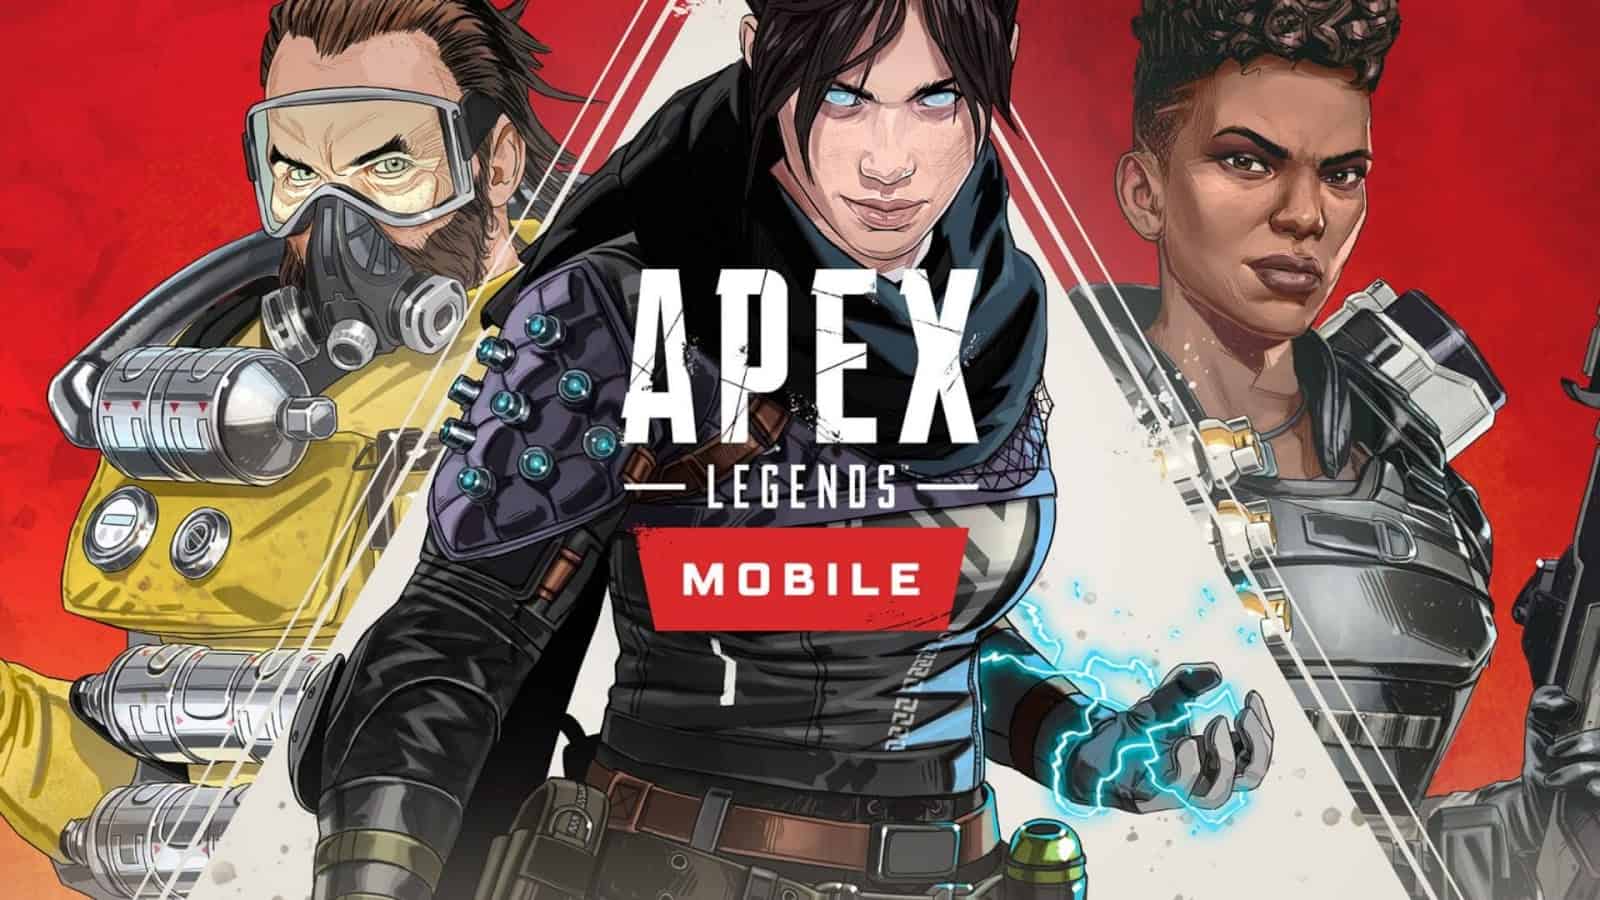 When Is Apex Legends Coming To Mobile?